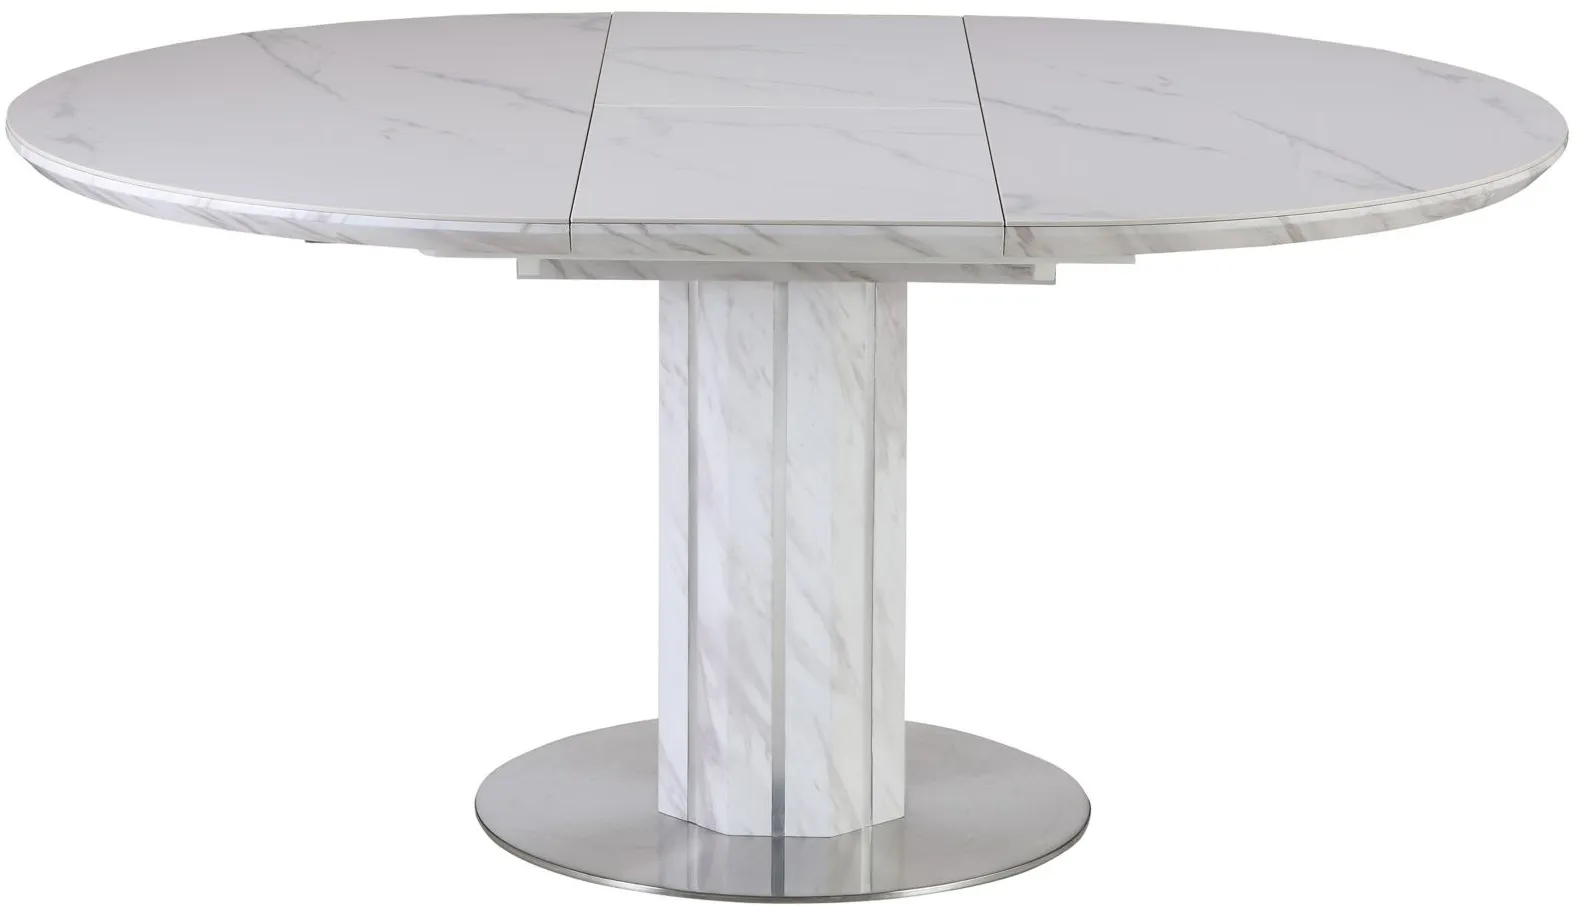 Gretchen Dining Table in White by Chintaly Imports